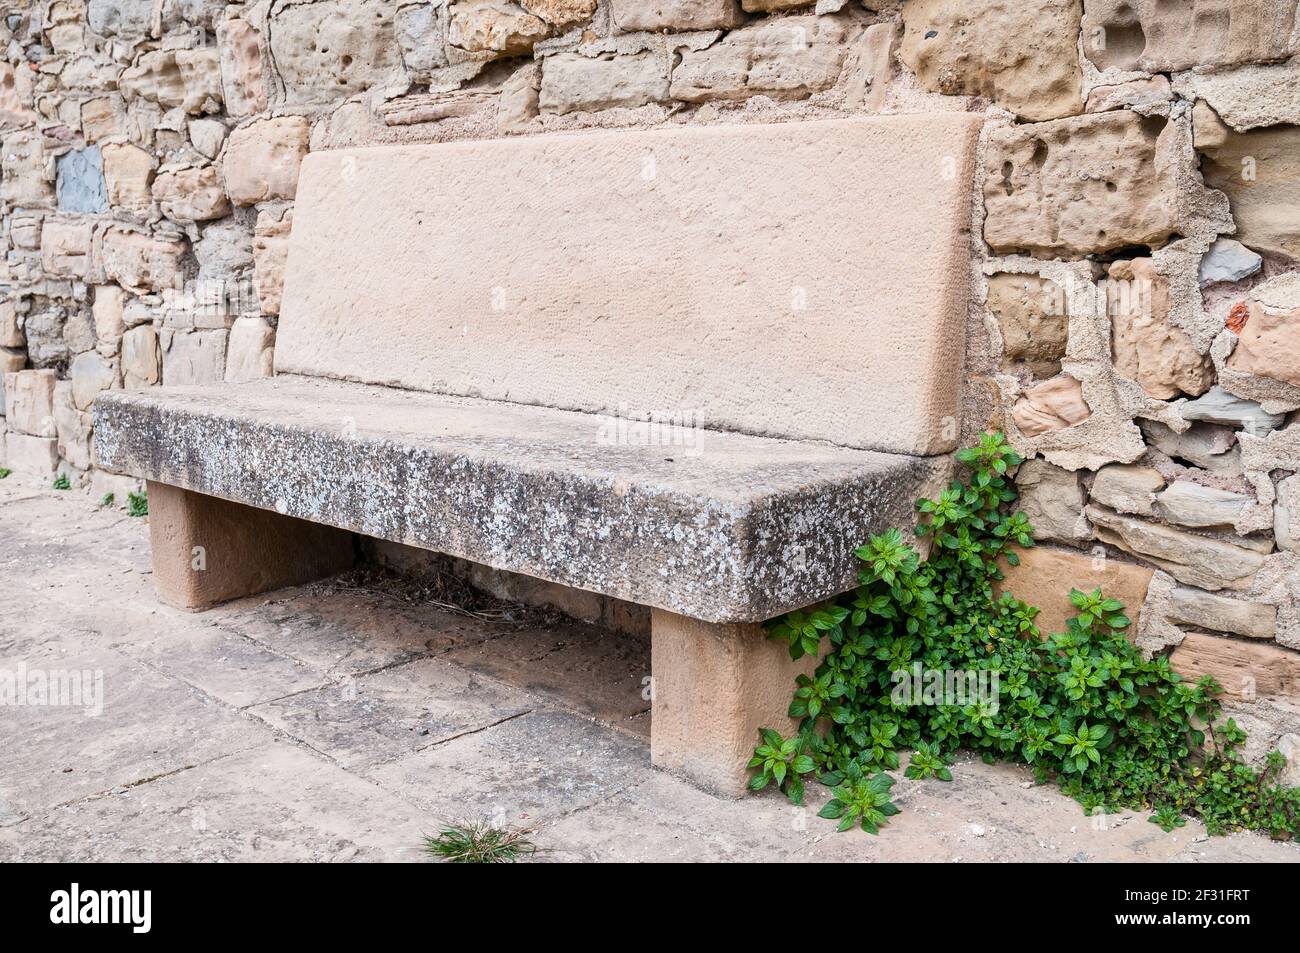 stone bench, and Parietaria officinalis on the side, Talamanca, Catalonia, Spain Stock Photo